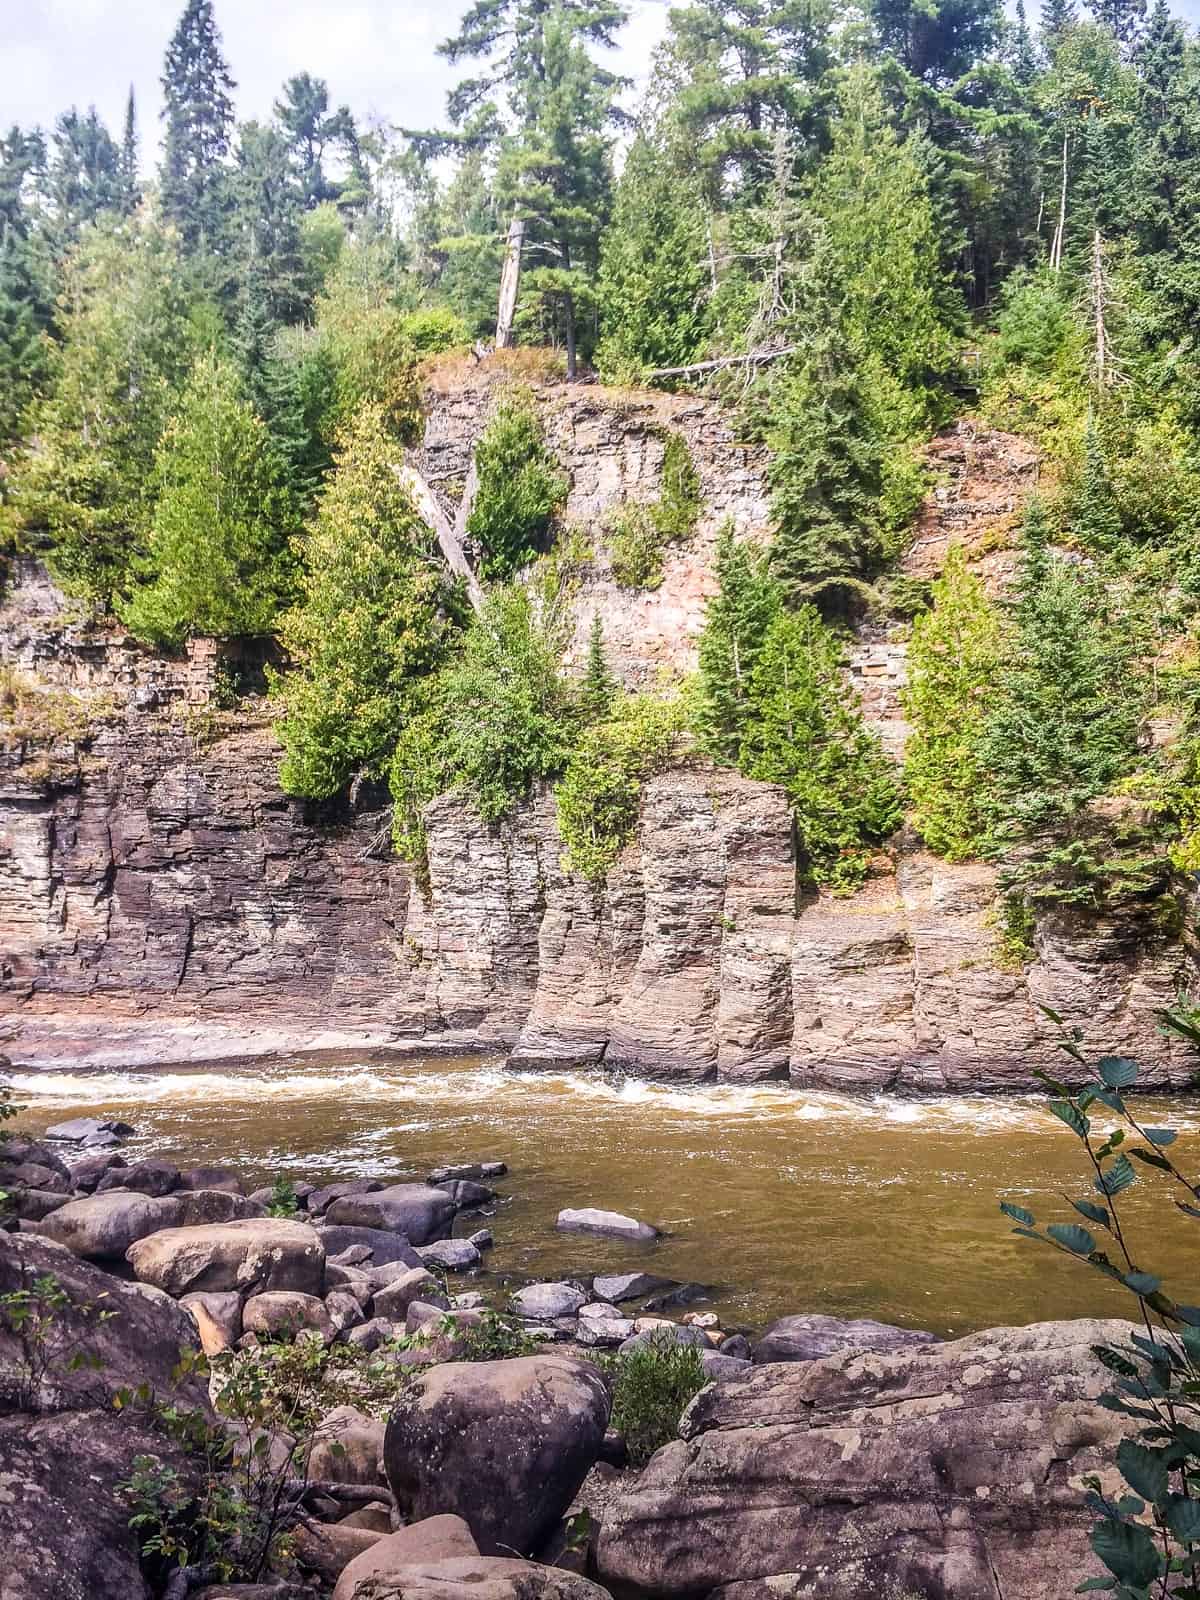 Rock formations created by the Pigeon River in Grand Portage State Park